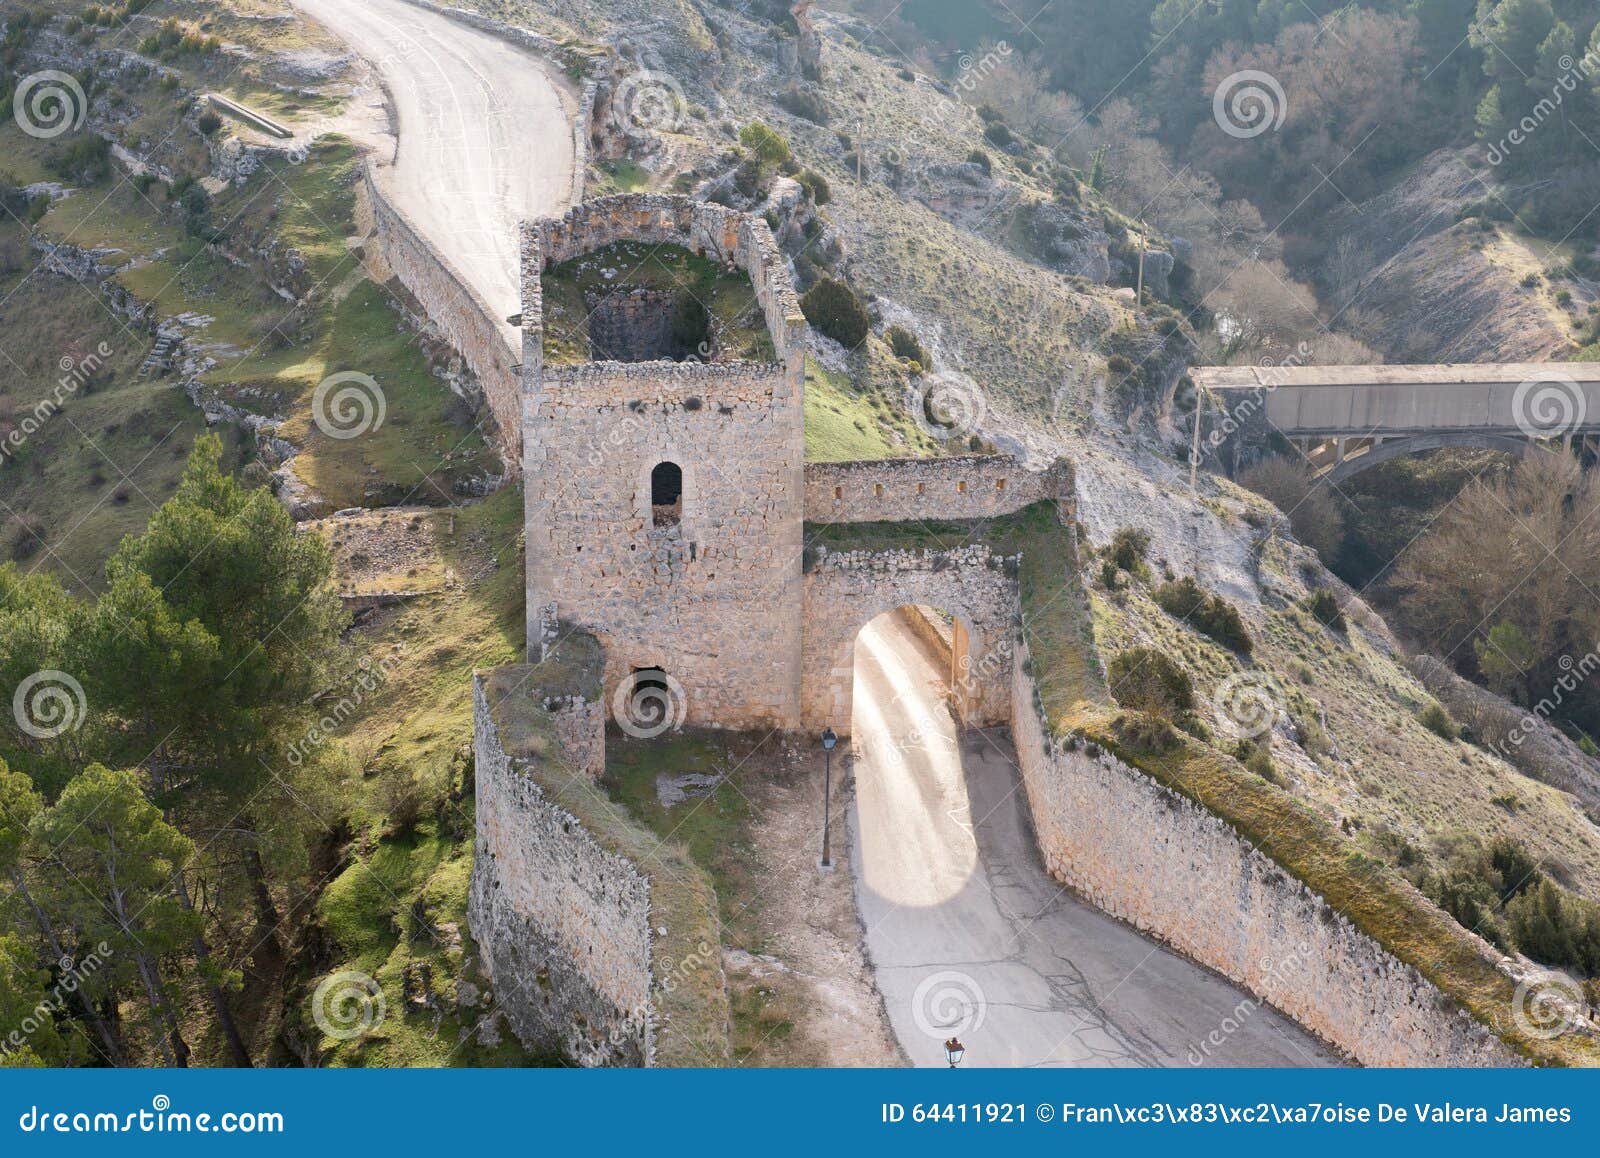 stone-built, gated entrance in the historic city walls of alarcon, spain